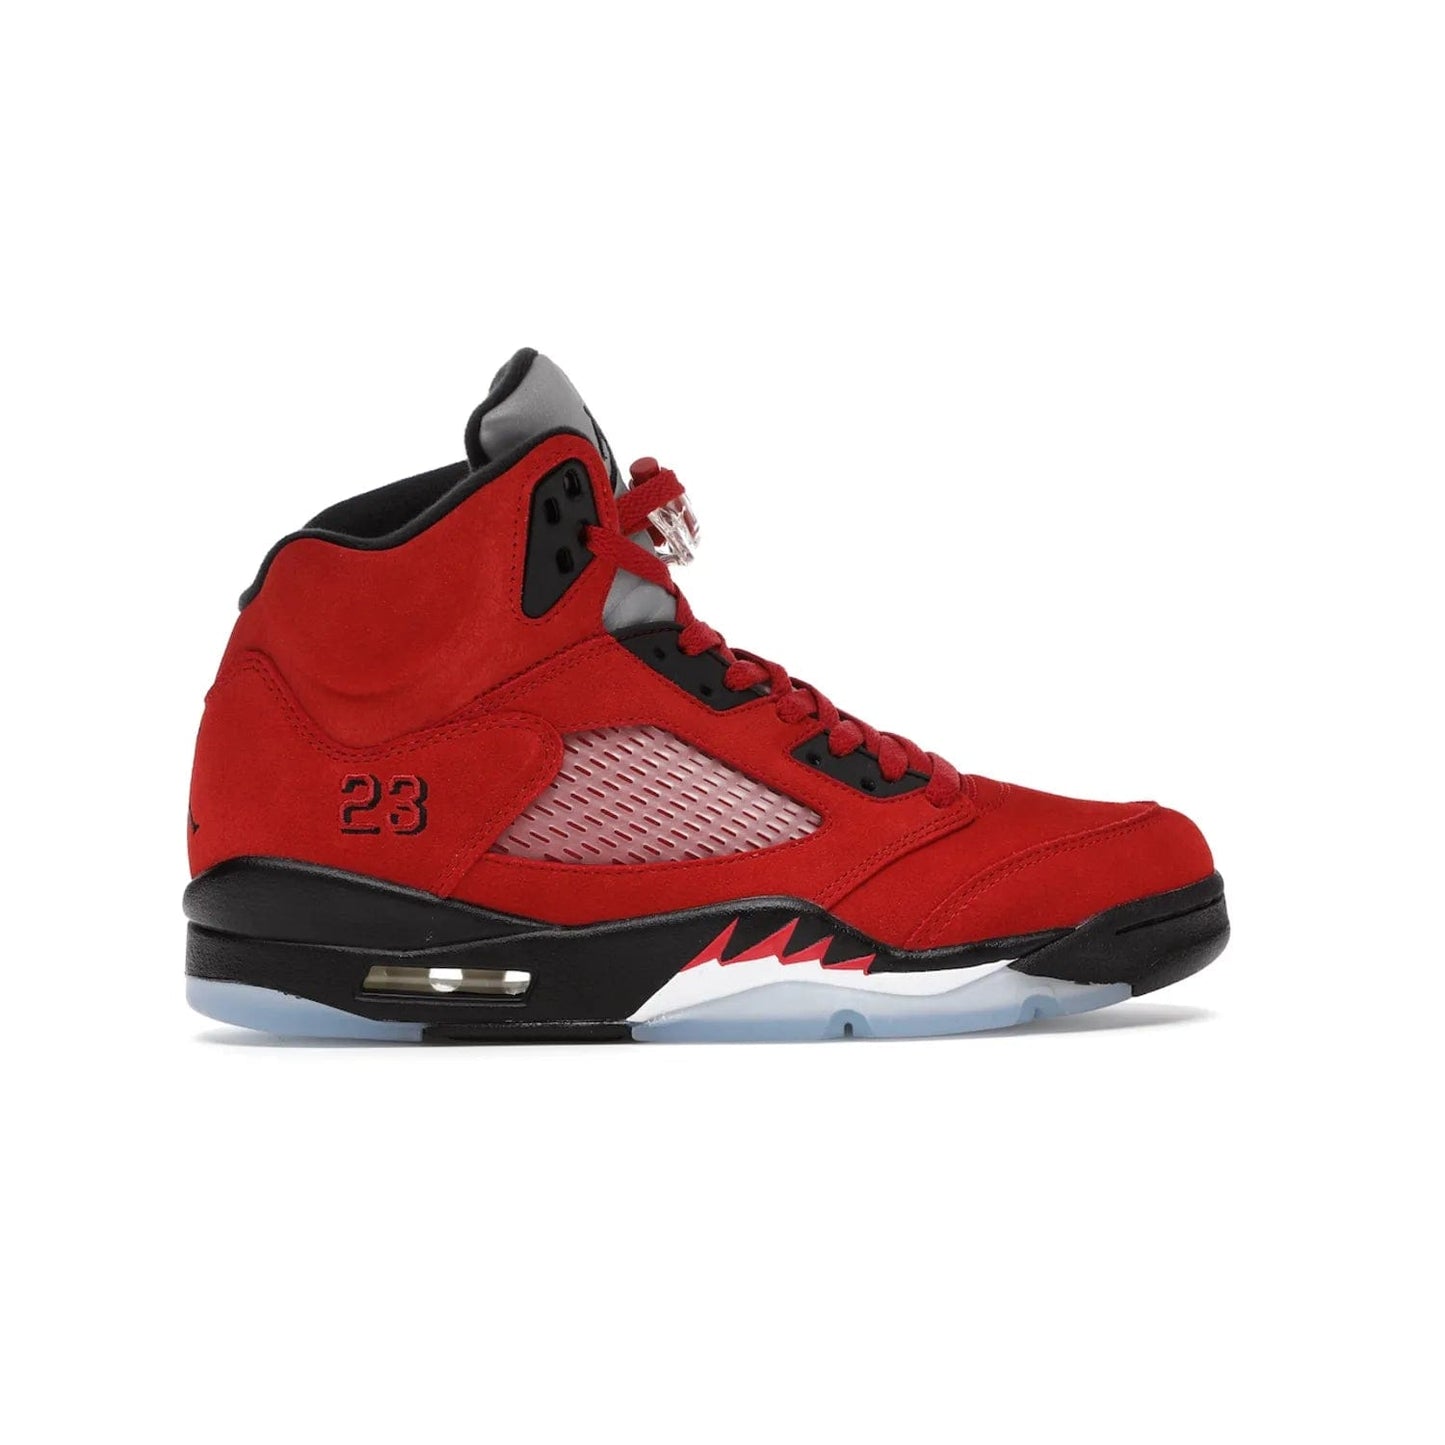 Jordan 5 Retro Raging Bull Red (2021) - Image 36 - Only at www.BallersClubKickz.com - Get ready for the 2021 stand-alone release of the Air Jordan 5 Raging Bulls! This all-suede upper combines luxe details like a Jumpman logo, red & black "23" embroidery and shark tooth detailing, atop a black midsole. Don't miss out - release date in April 2021 for $190.